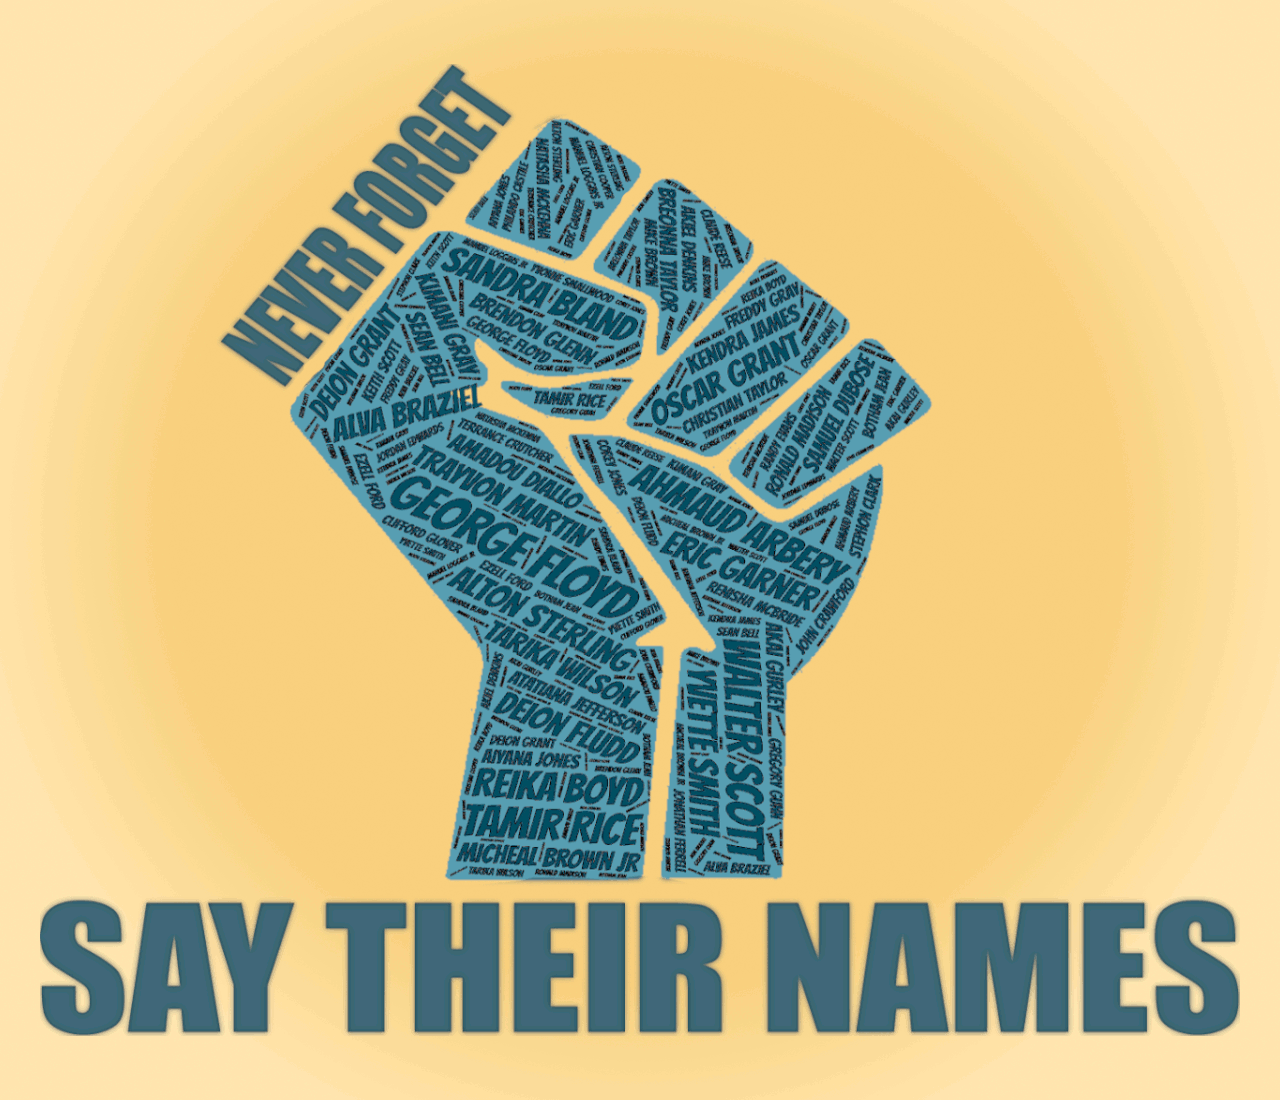 say their names - fist made of black lives taken by police brutality